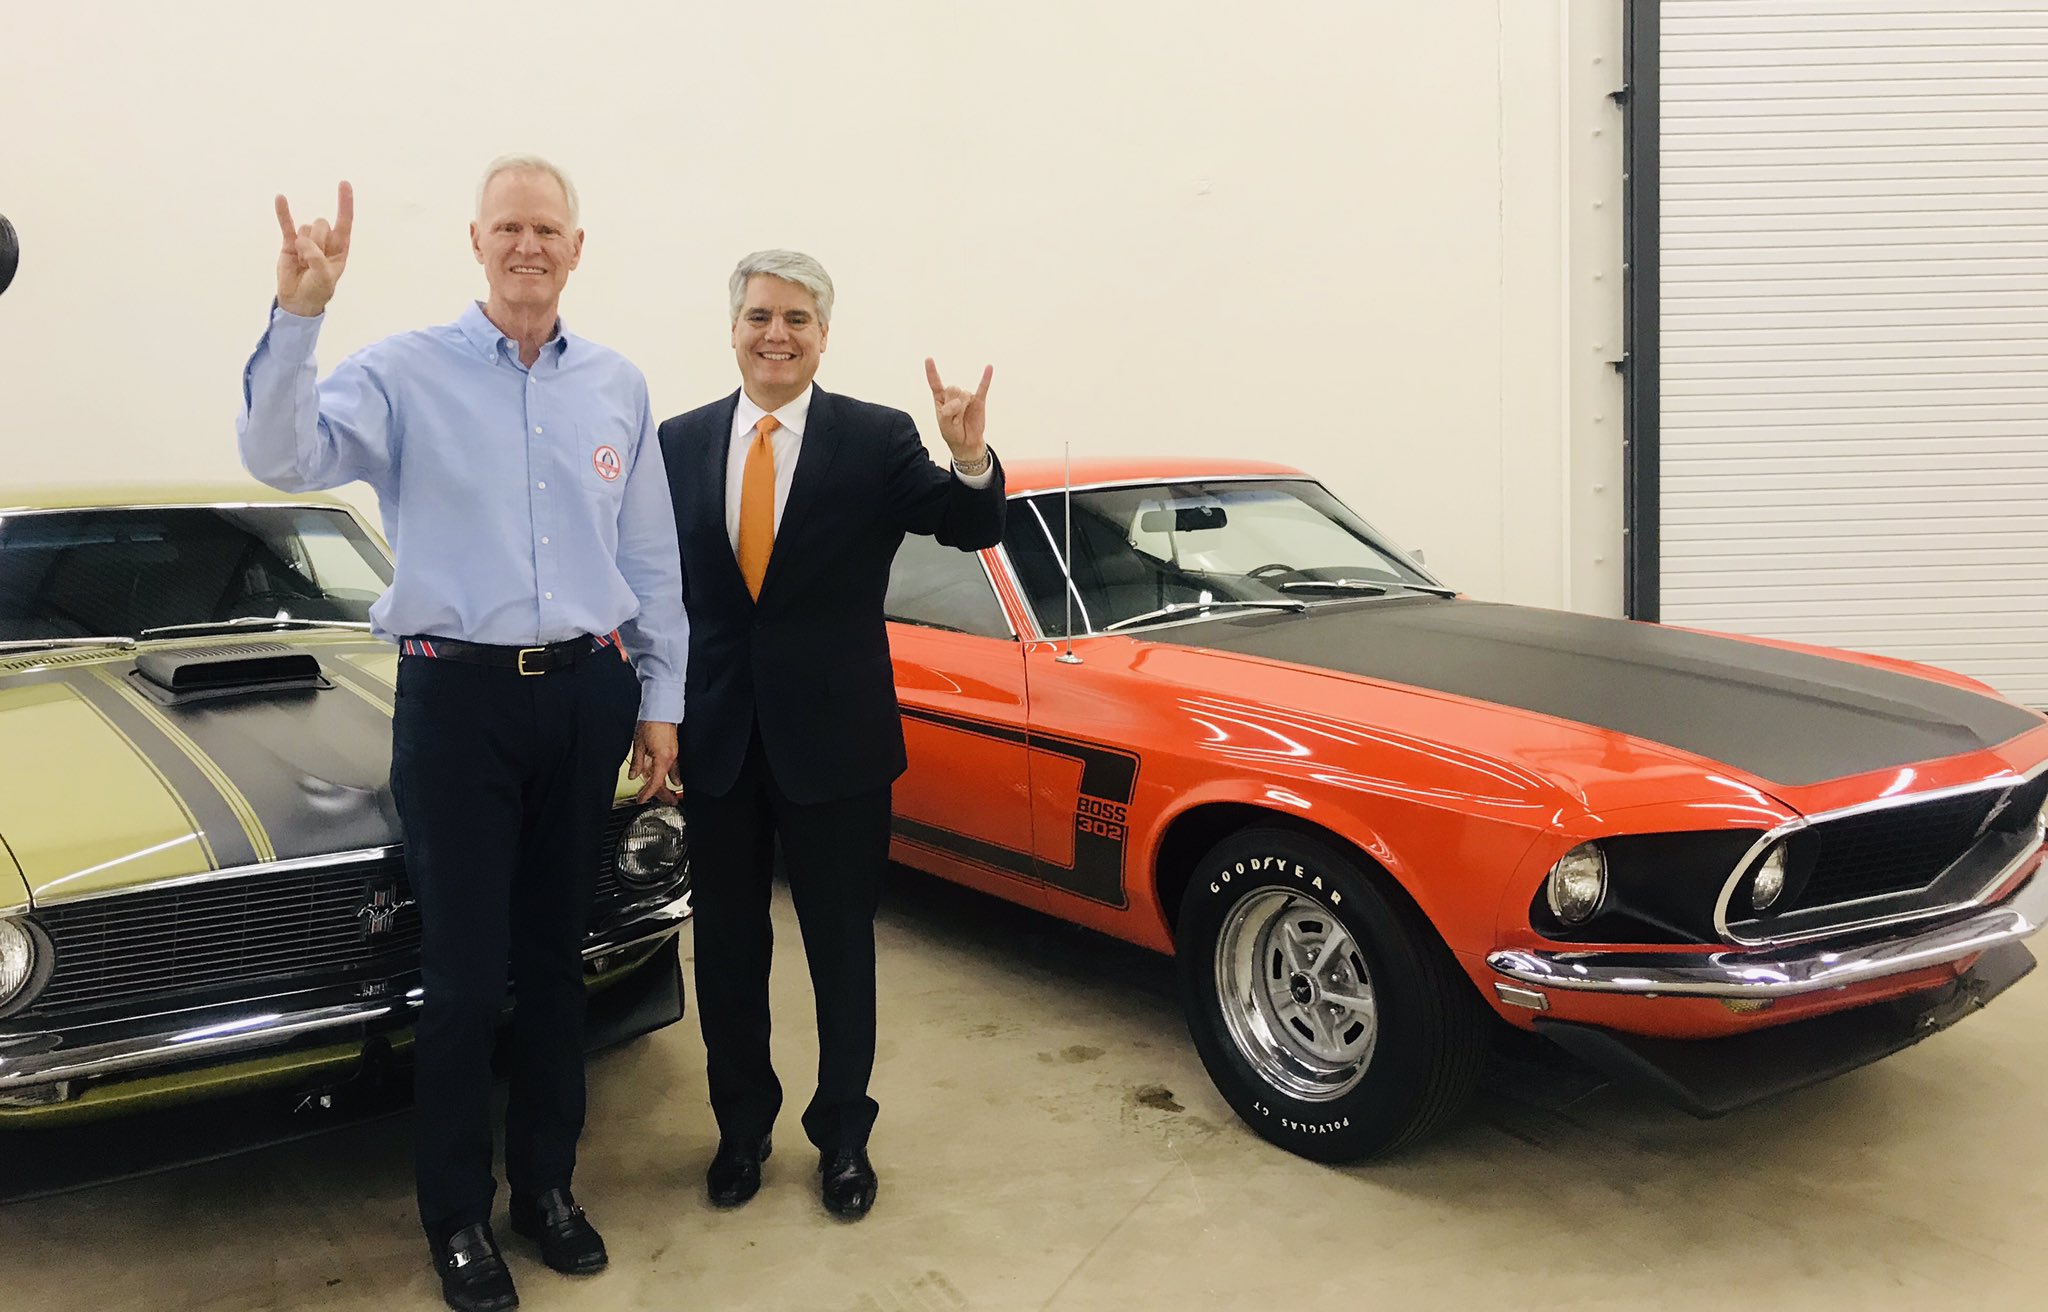 Gary Thomas Car Collection - Inside his Cool Garage which has Rare Mustangs And Shelby Cobras